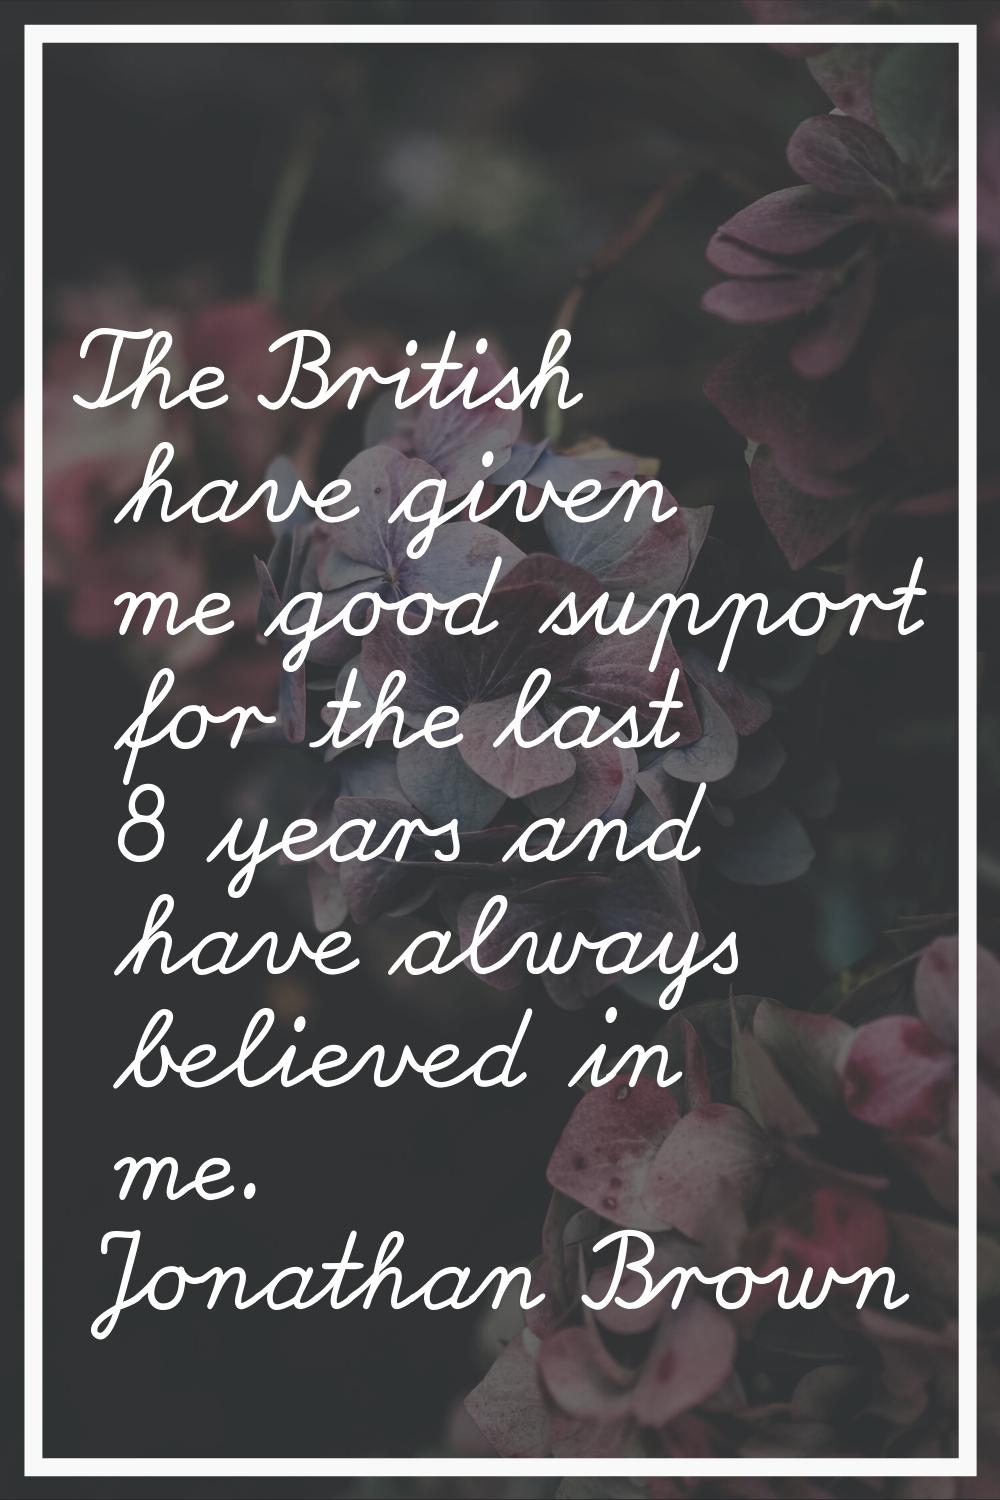 The British have given me good support for the last 8 years and have always believed in me.